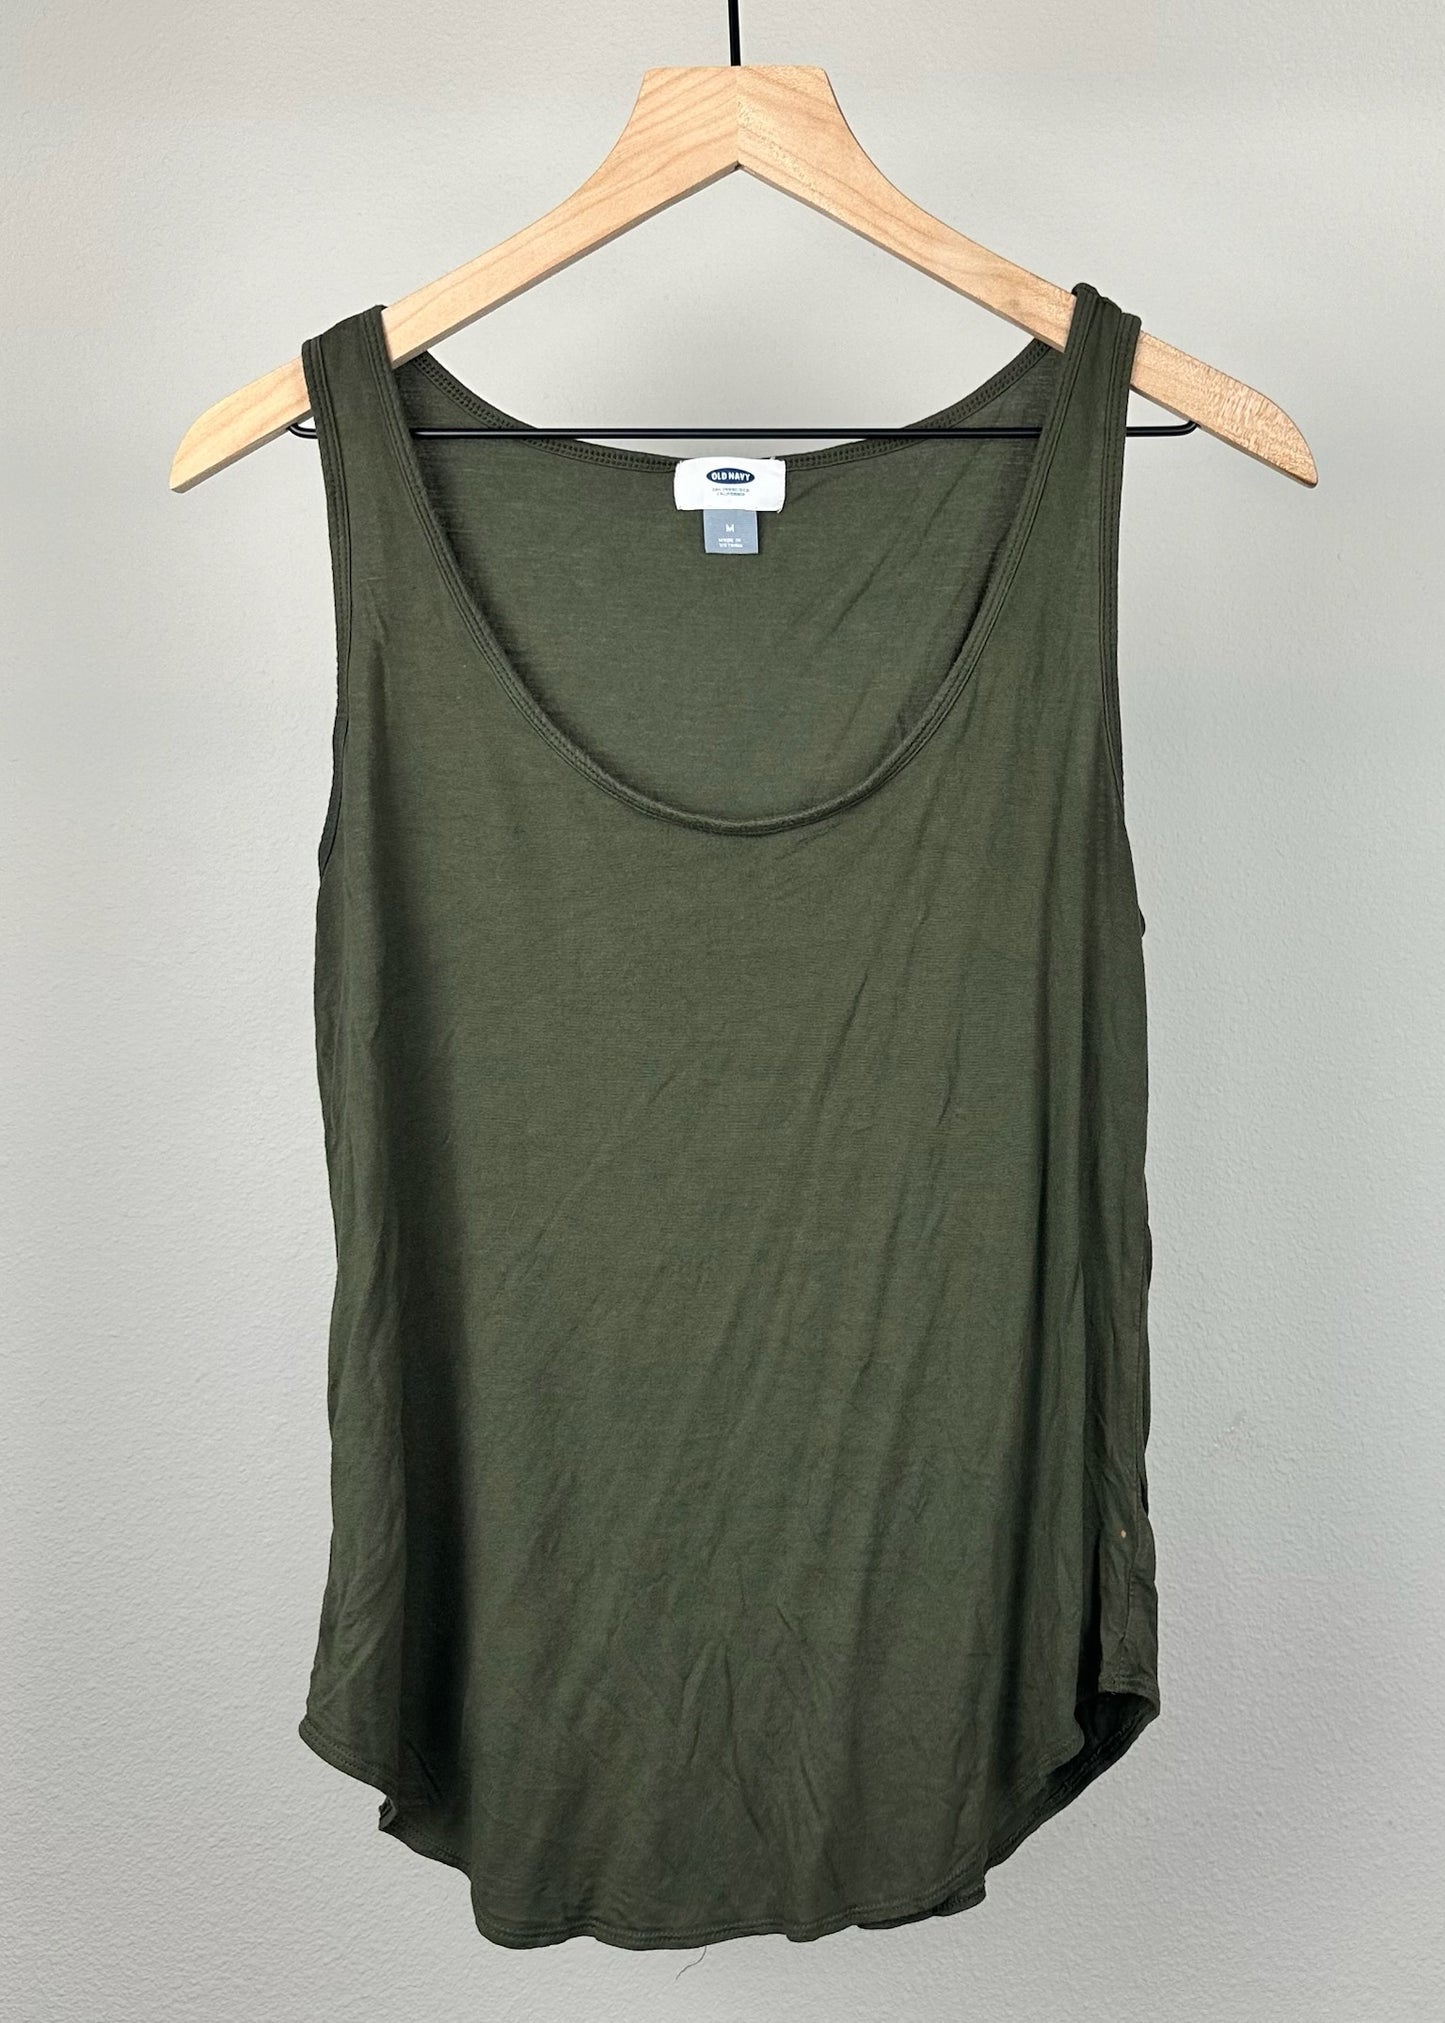 Green Tank Top by Old Navy